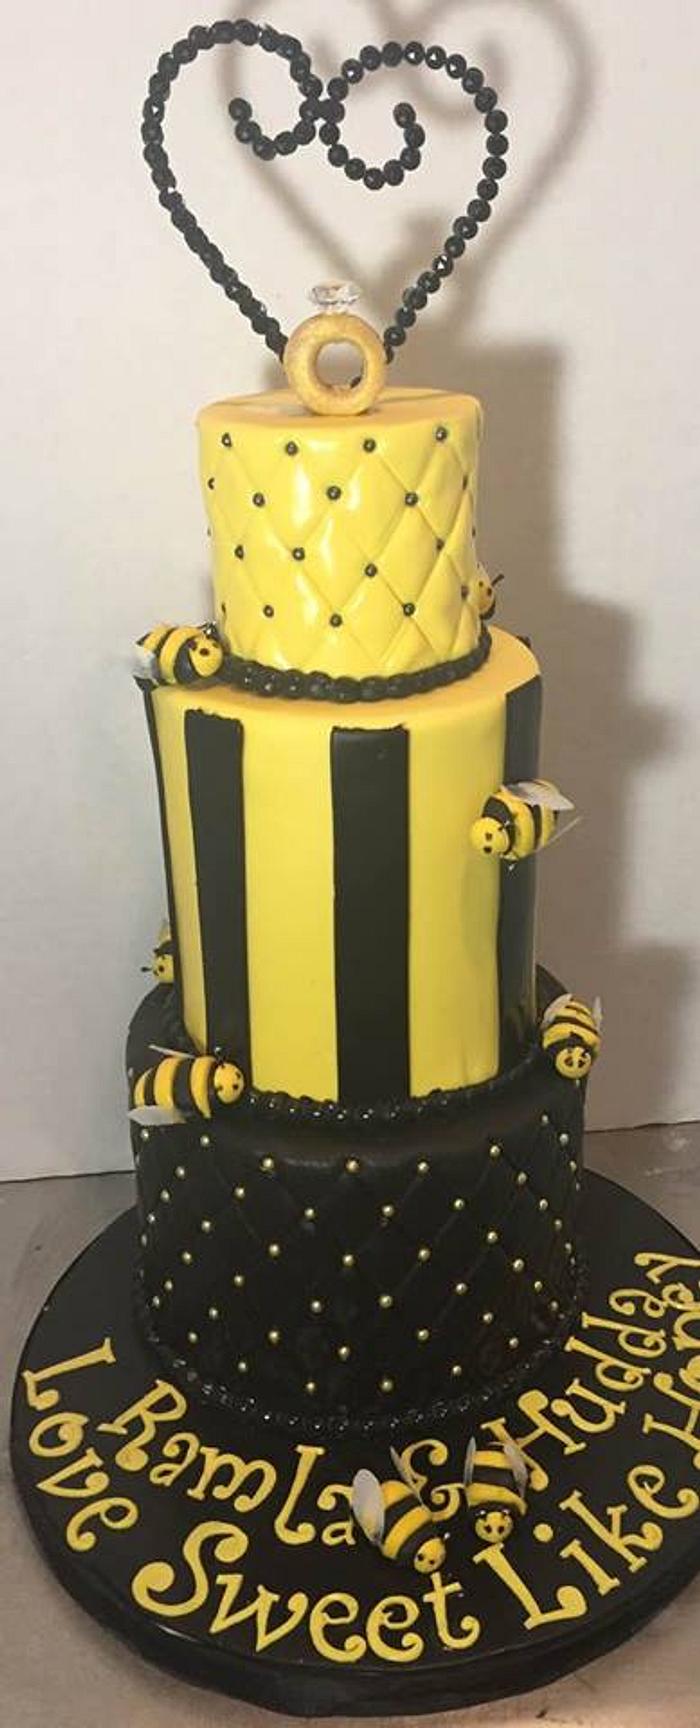 Bumble Bee Bridal Shower Cake